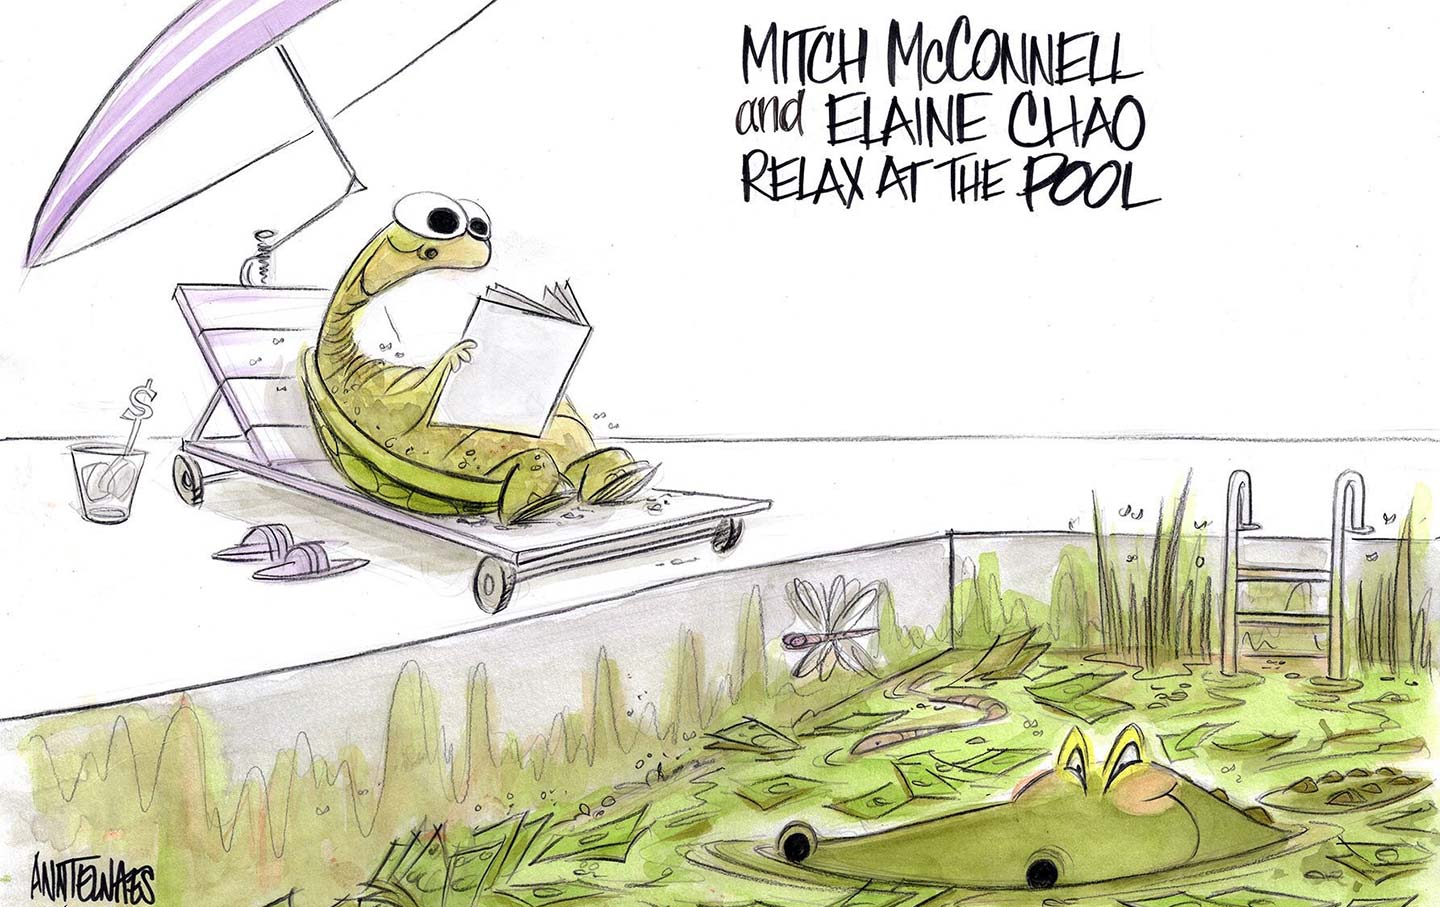 Mitch McConnell and Elaine Chao Relax at the Pool